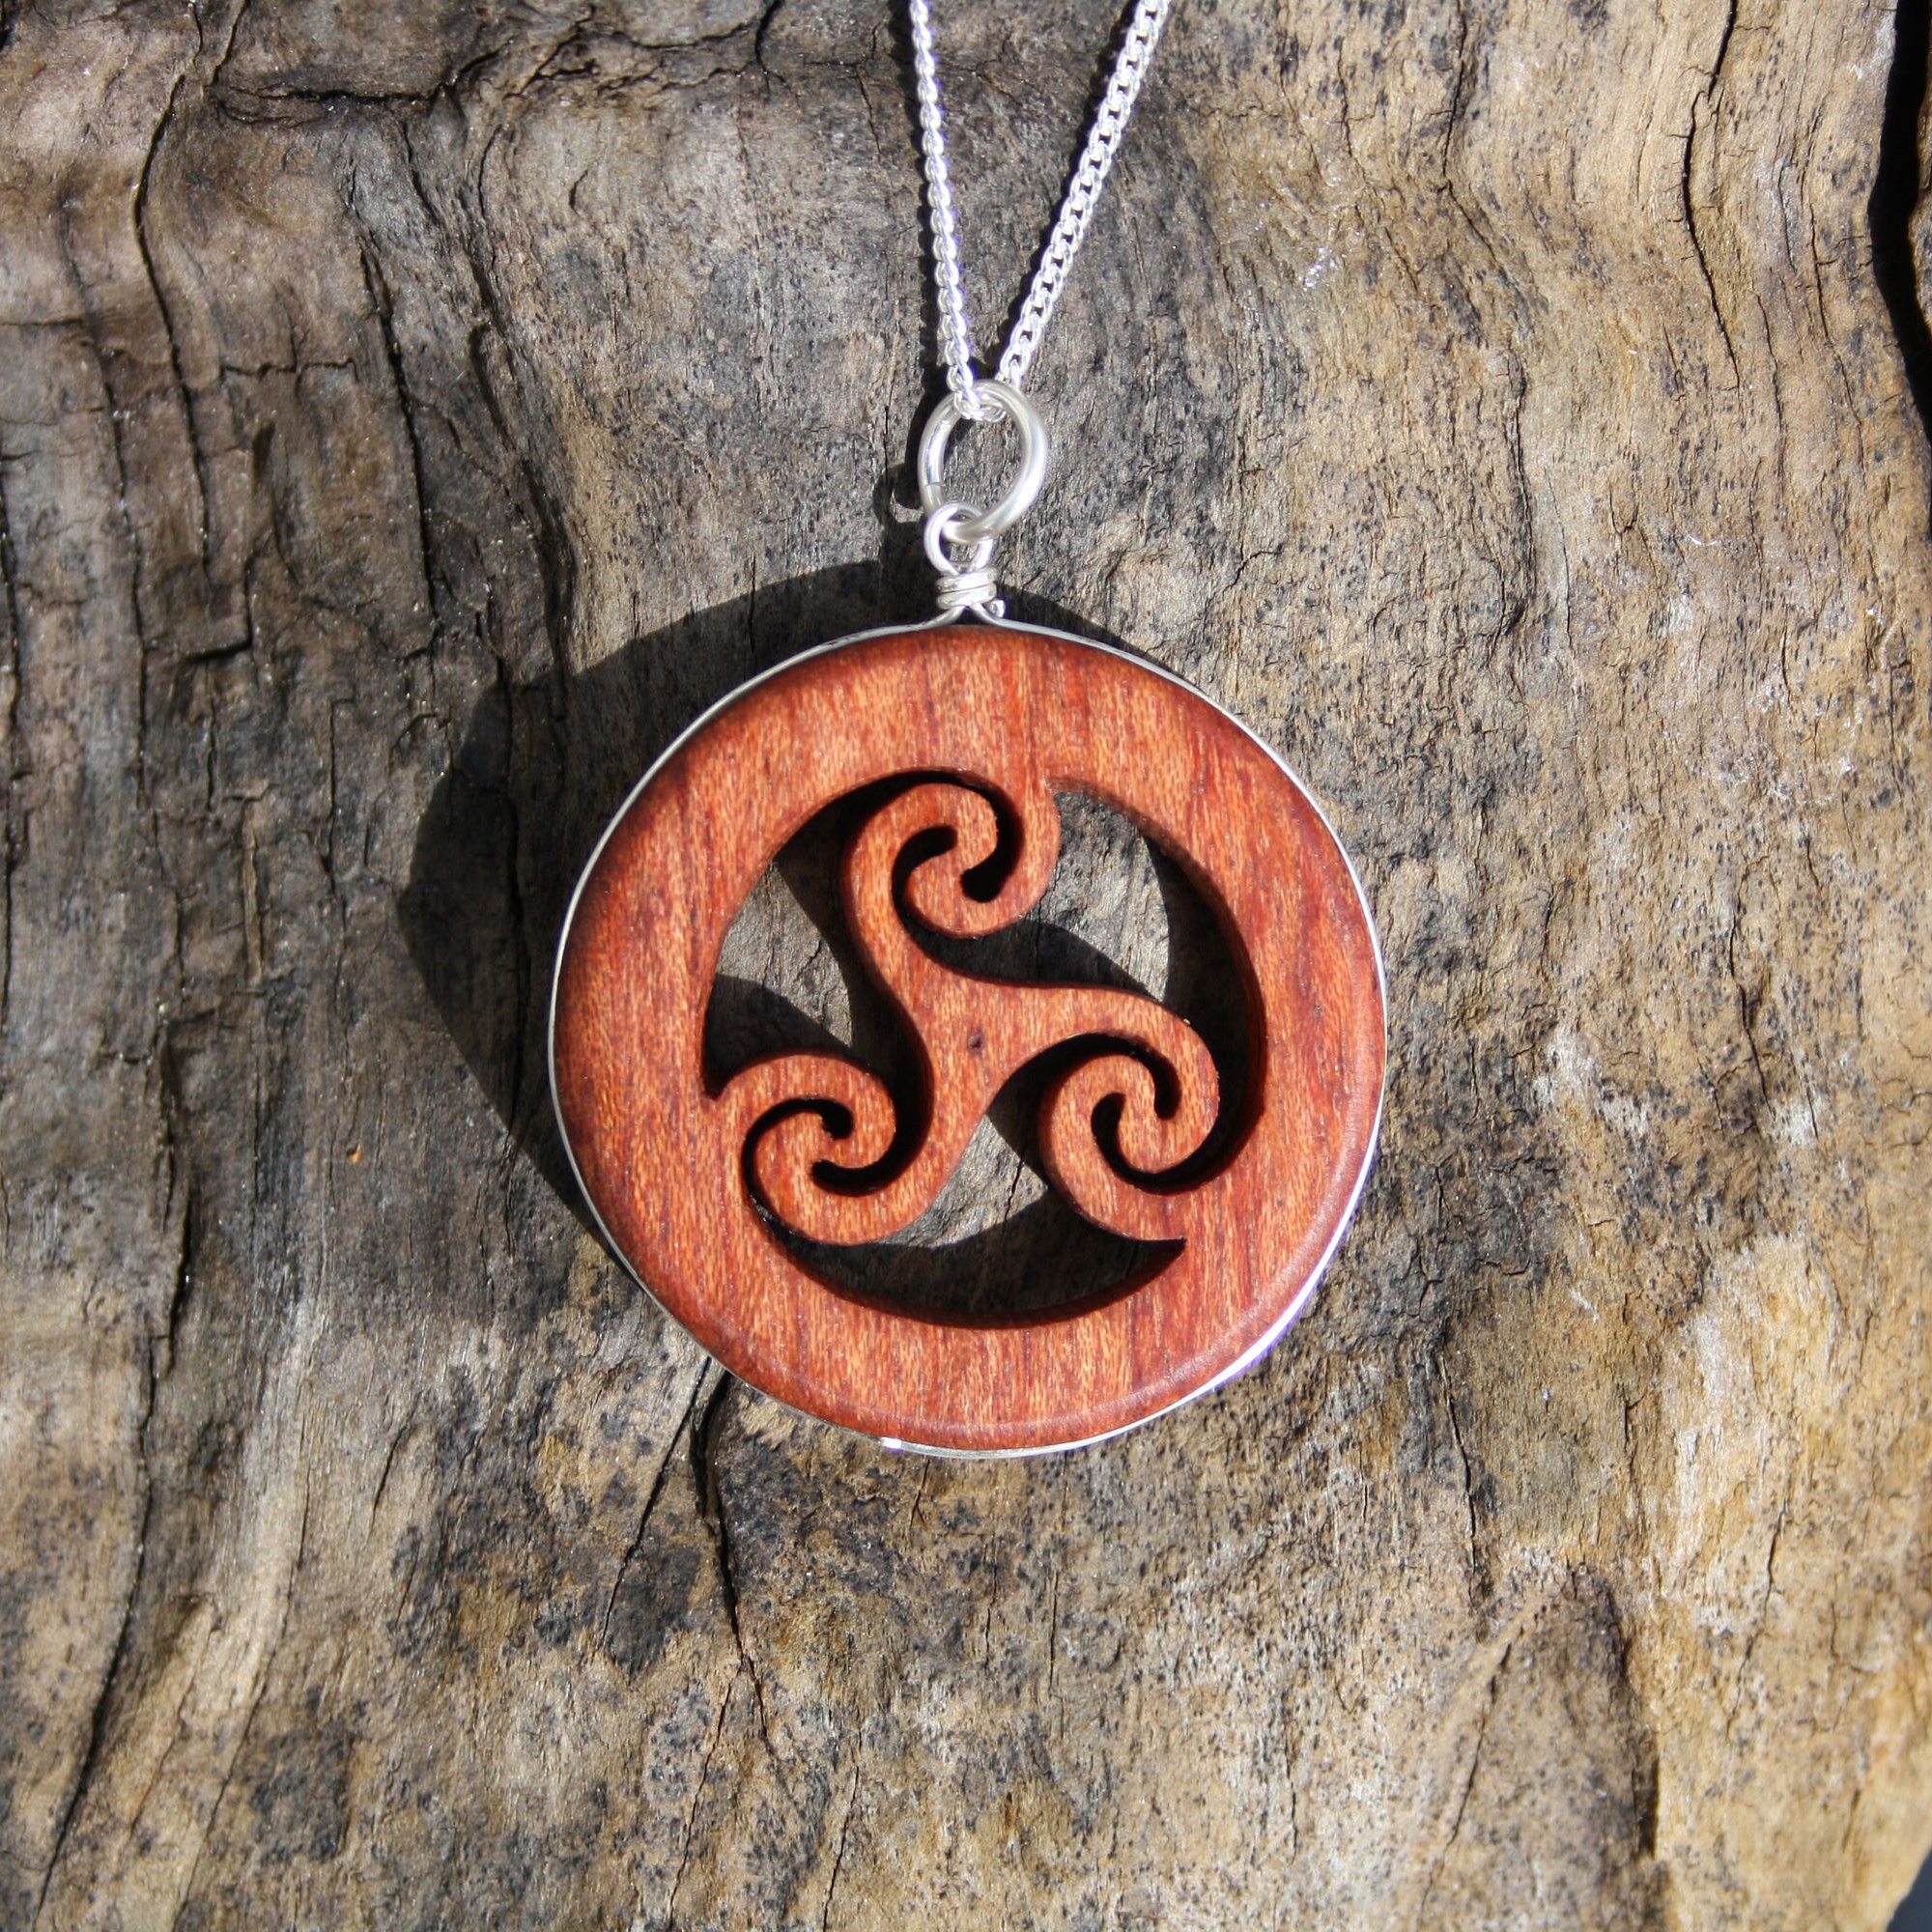 Hand Carved Wooden Celtic Cross Pendant, Irish Chestnut Wood Cross Necklace, Unique Wooden Celtic Jewelry for Men Made in Ireland